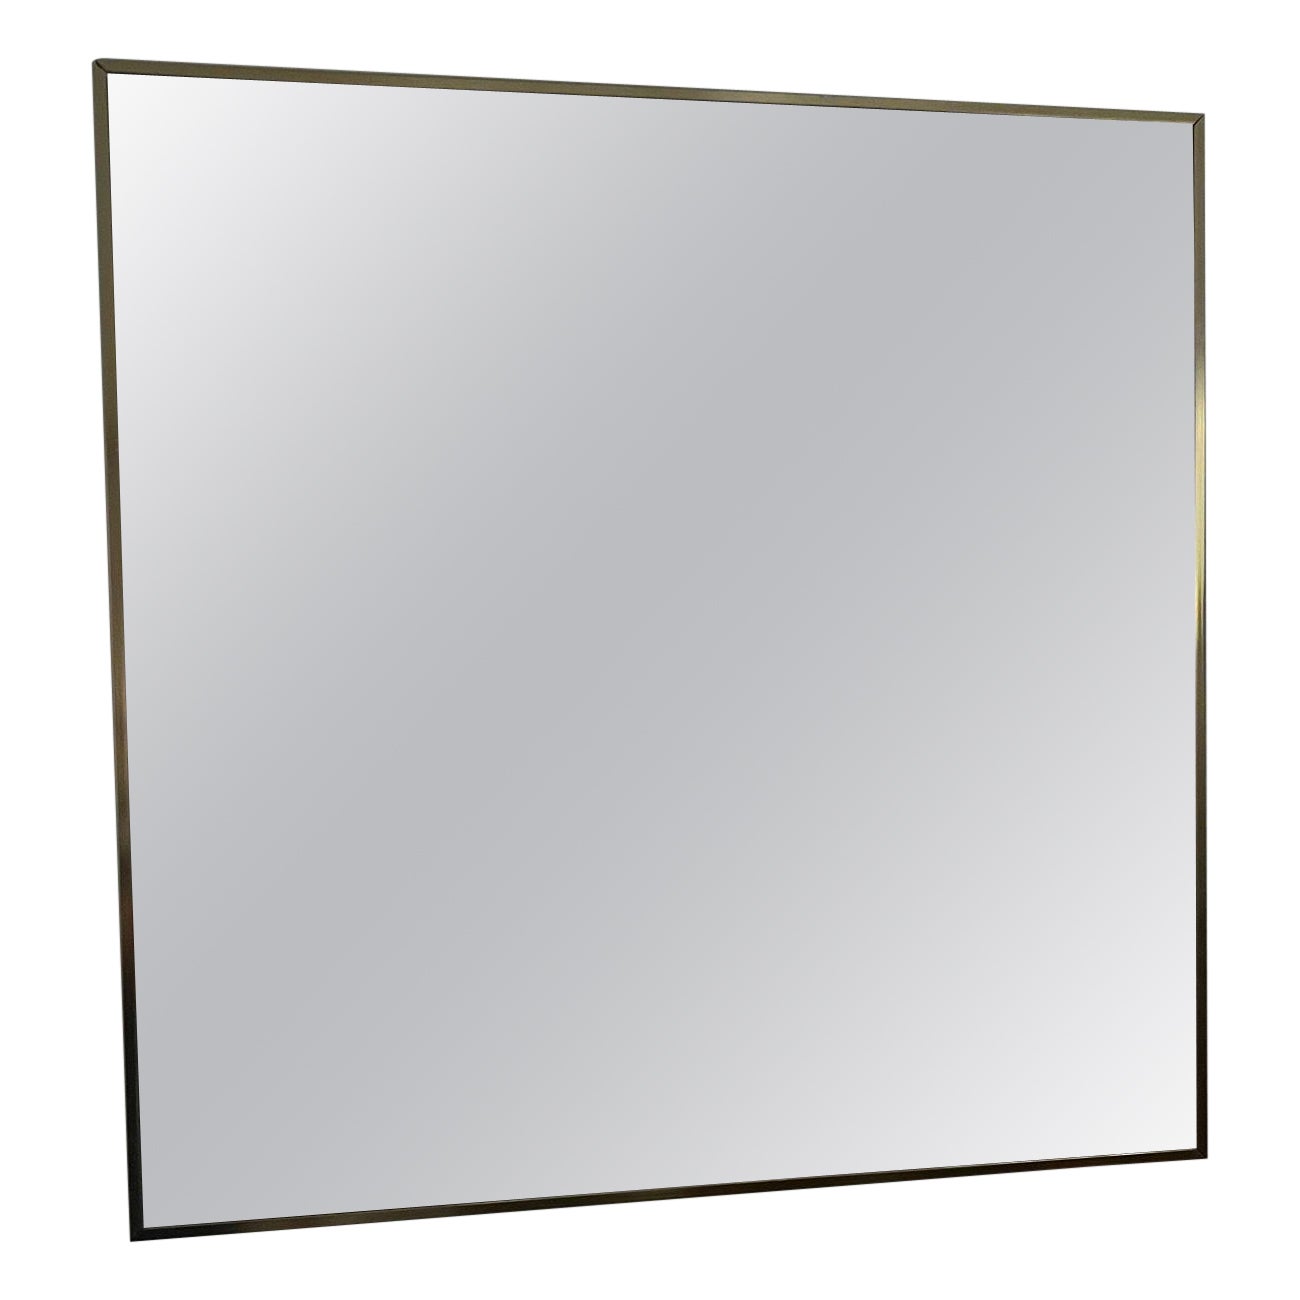 What is an infinity mirror used for?